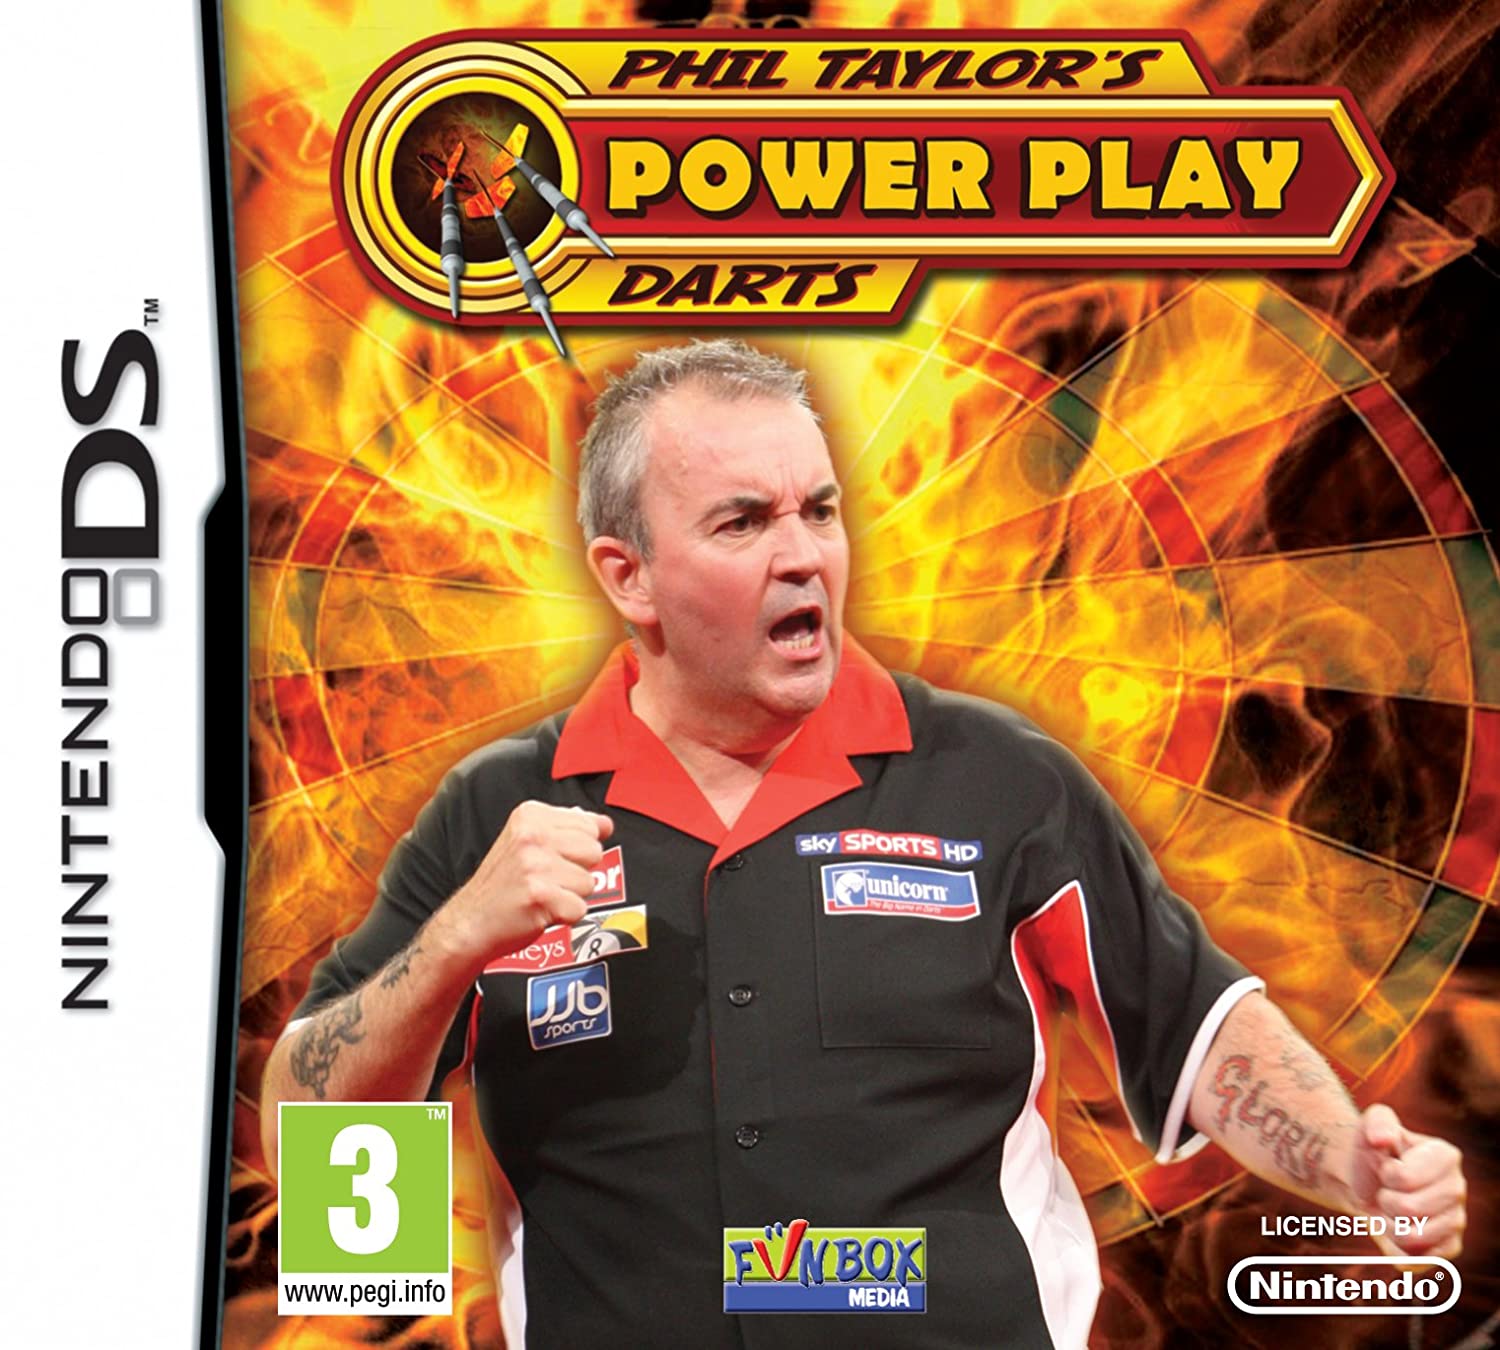 Phil Taylor's Power Play Darts [Nintendo DS]